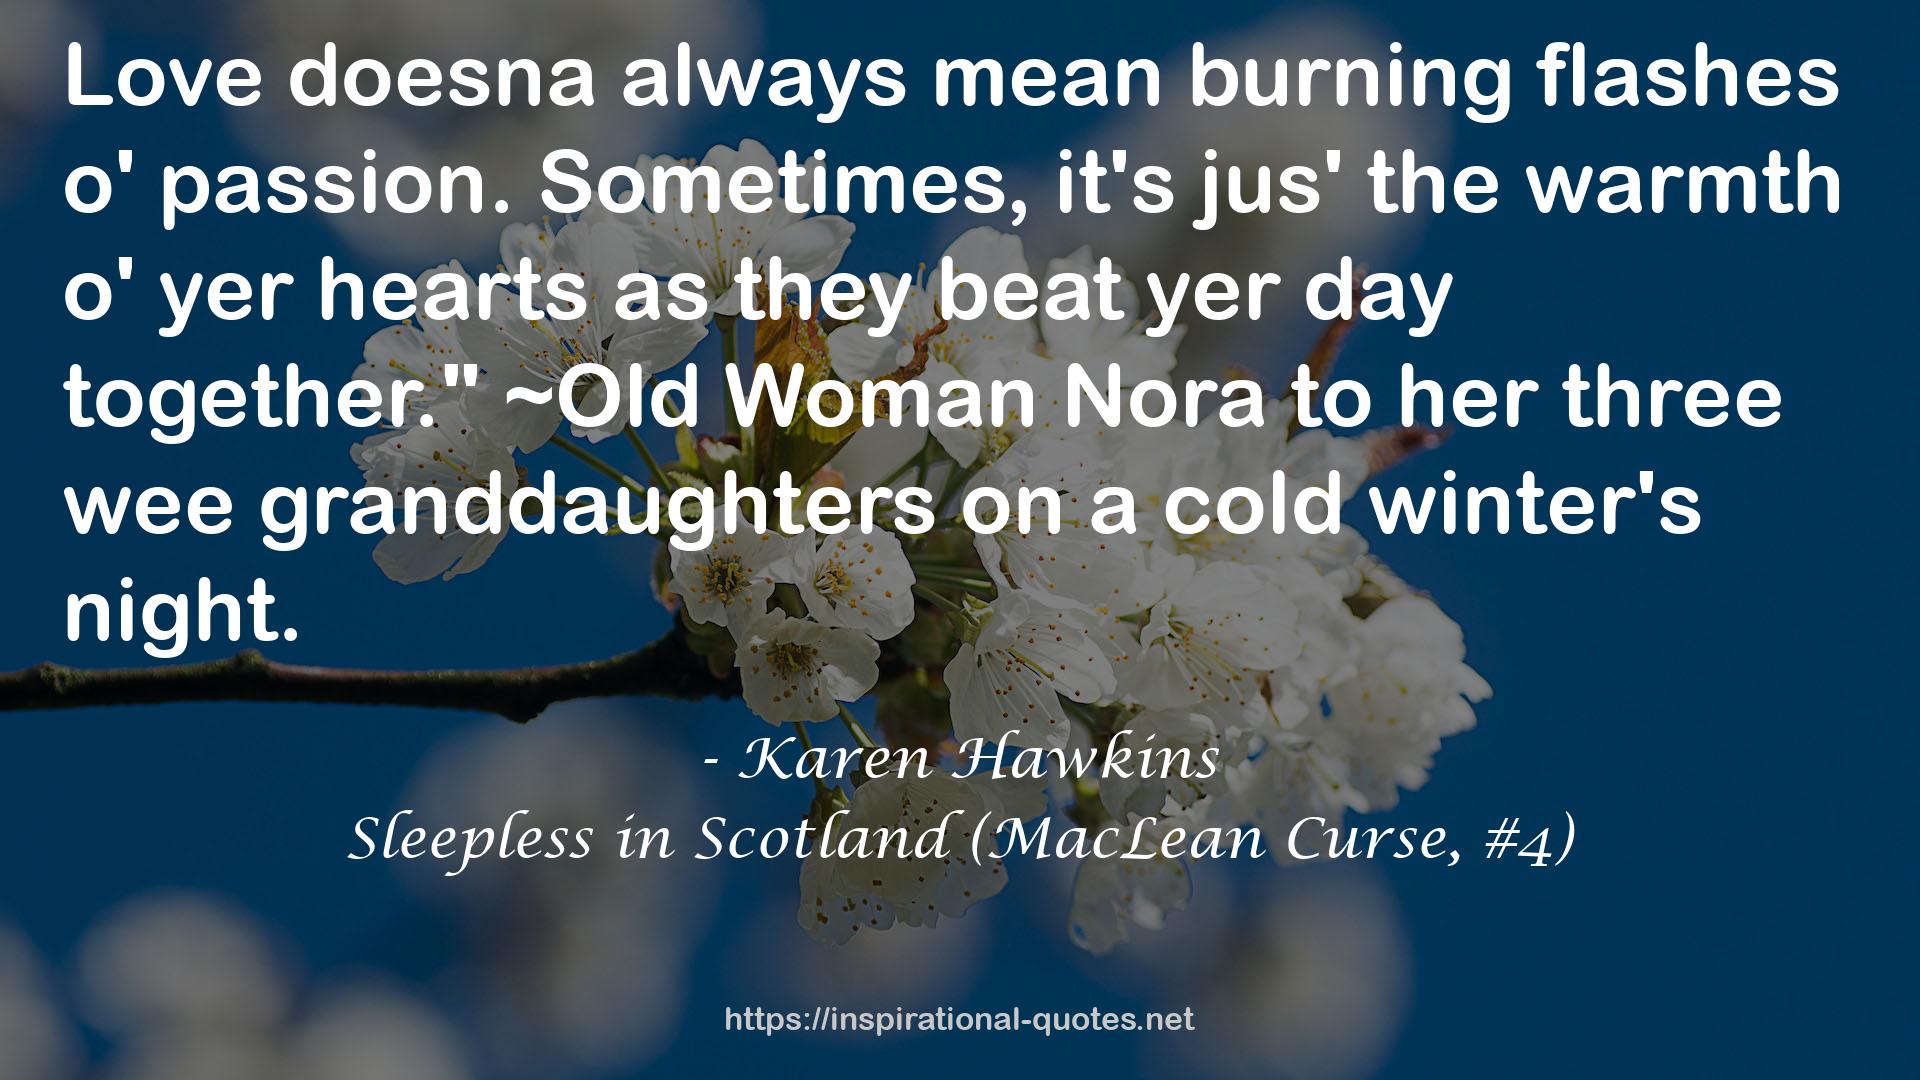 Sleepless in Scotland (MacLean Curse, #4) QUOTES